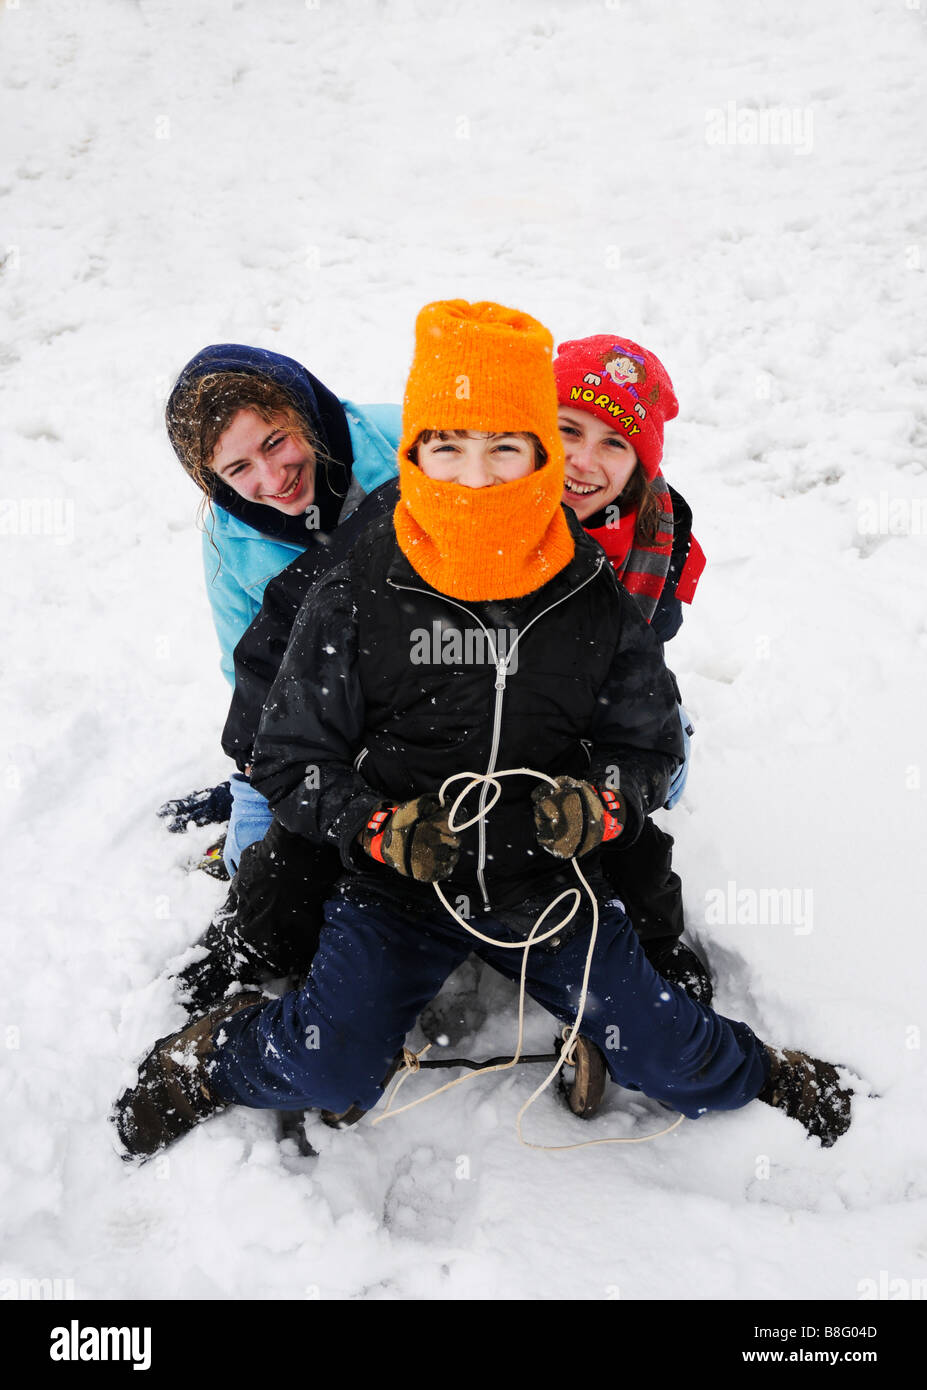 image of children laughing on sledge Stock Photo